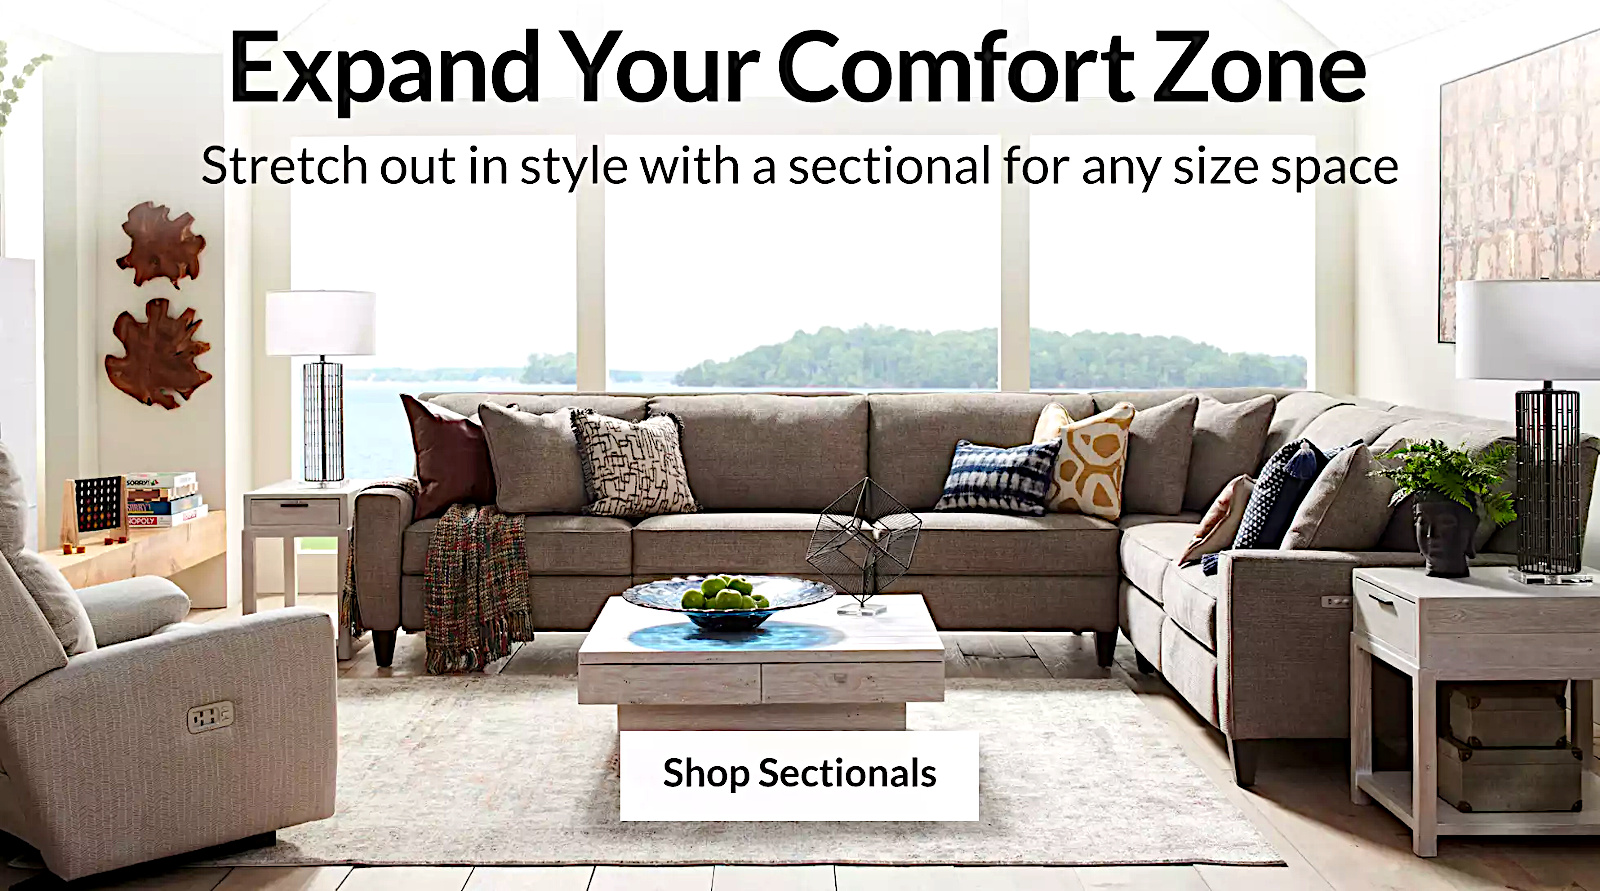 Expand your comfort zone discount